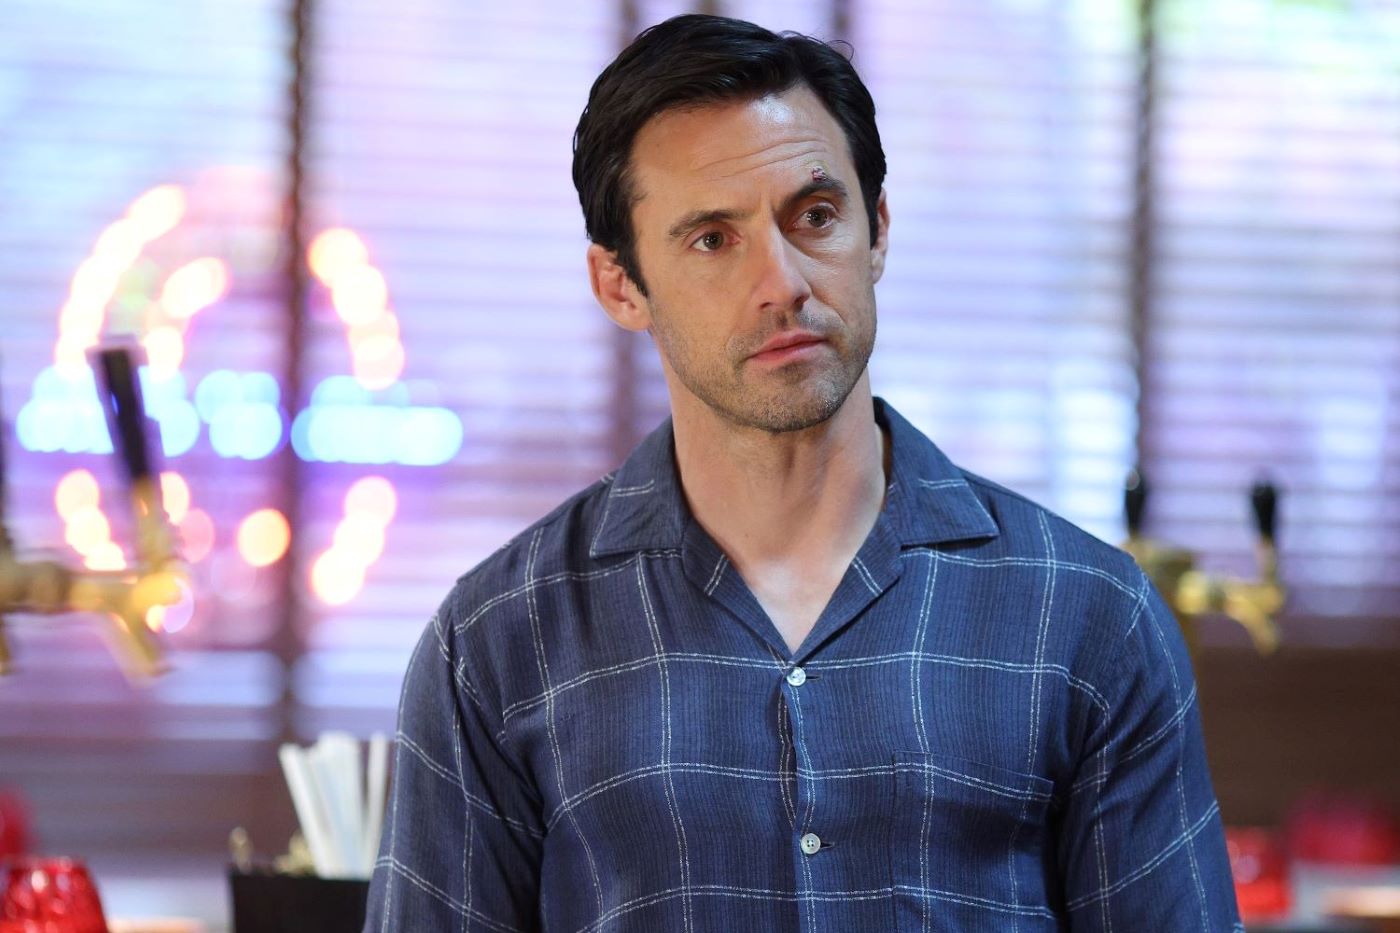 Milo Ventimiglia, in character as Charlie Nicoletti in 'The Company You Keep' Season 1 Episode 4, 'All In,' wears a blue button-up shirt with white horizontal and vertical intersecting stripes on it.